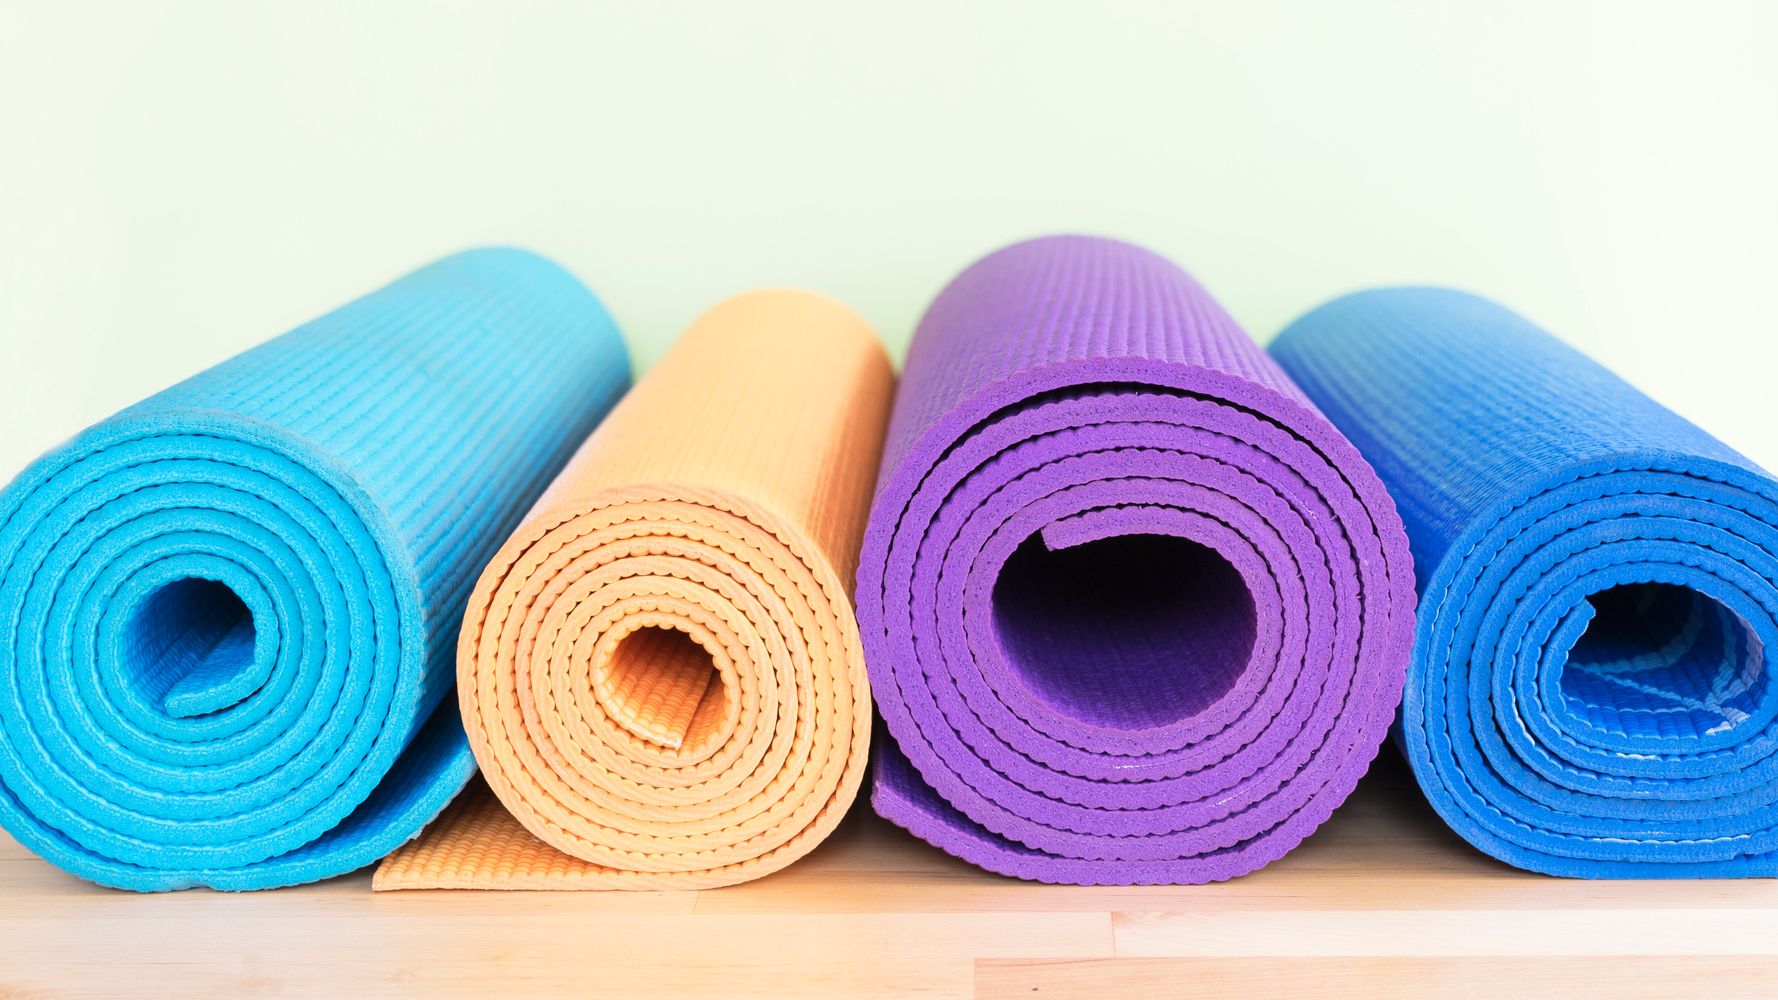 What's The Difference Between A Cheap Yoga Mat And An Expensive One?